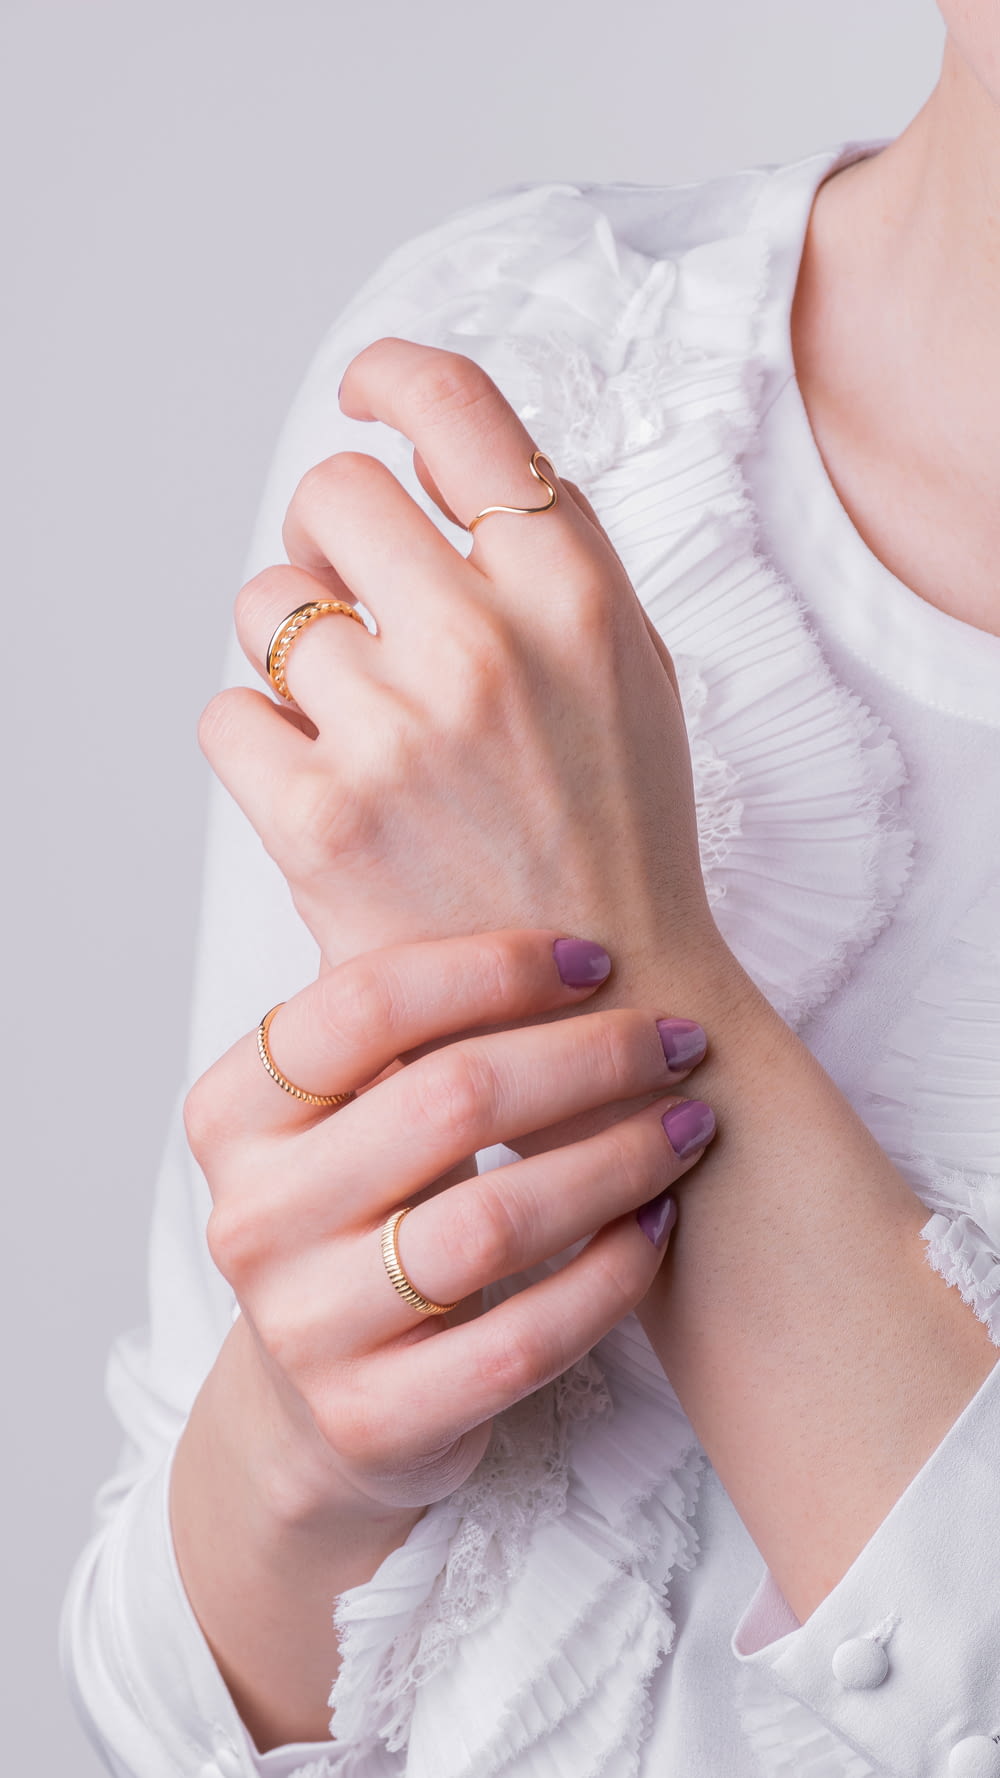 a woman in a white shirt is holding her hands together